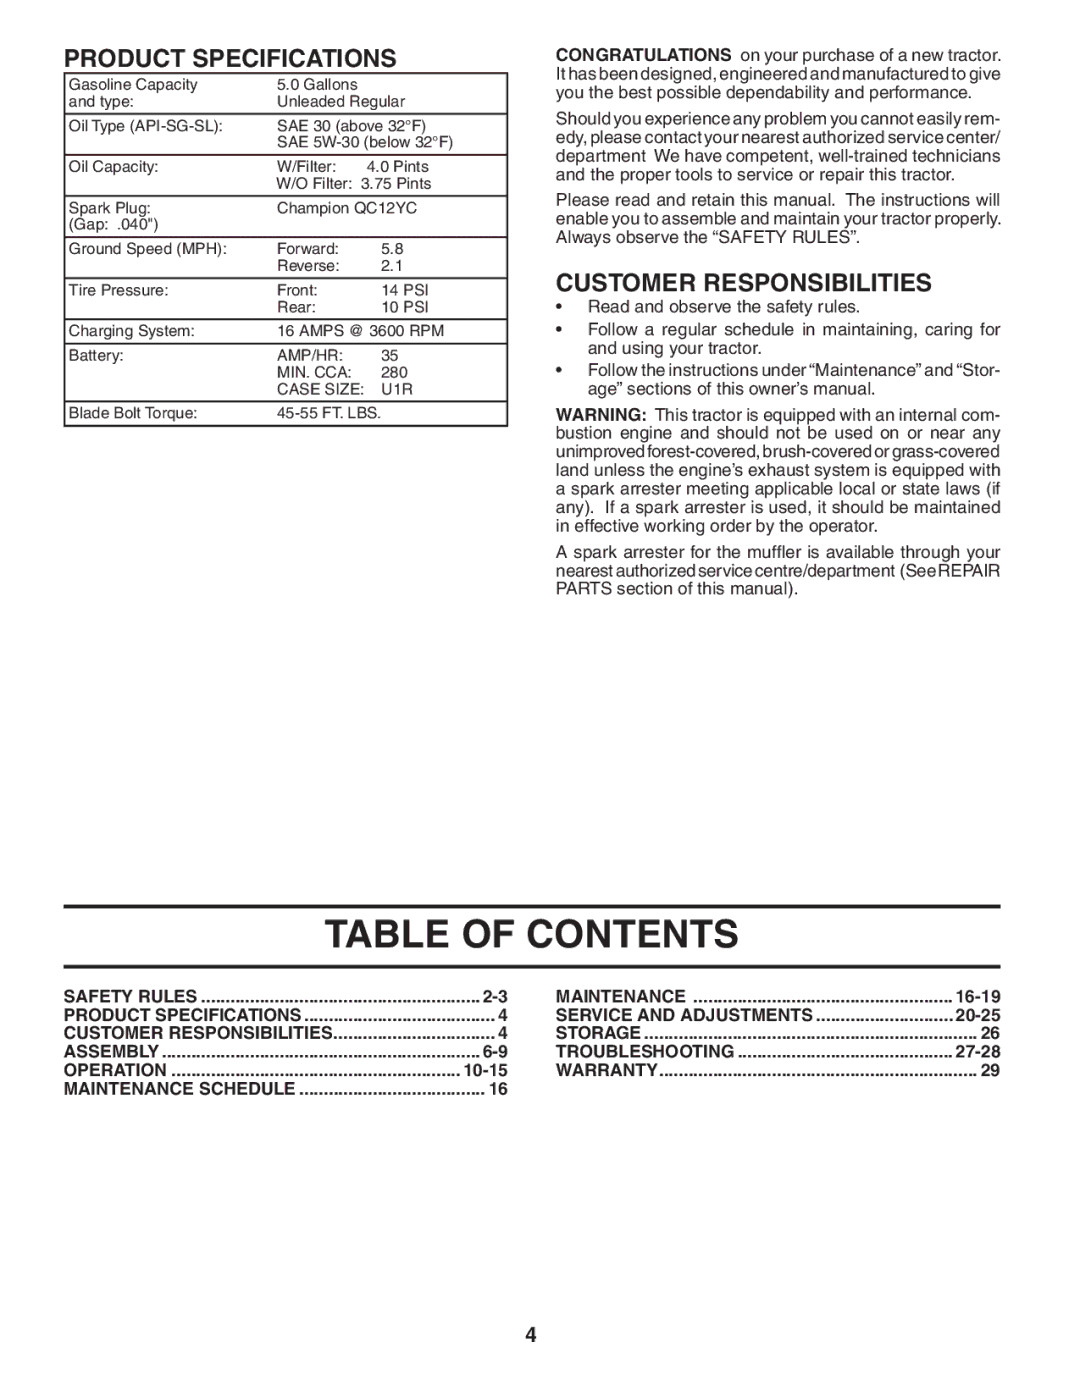 Poulan 195806 manual Table of Contents 